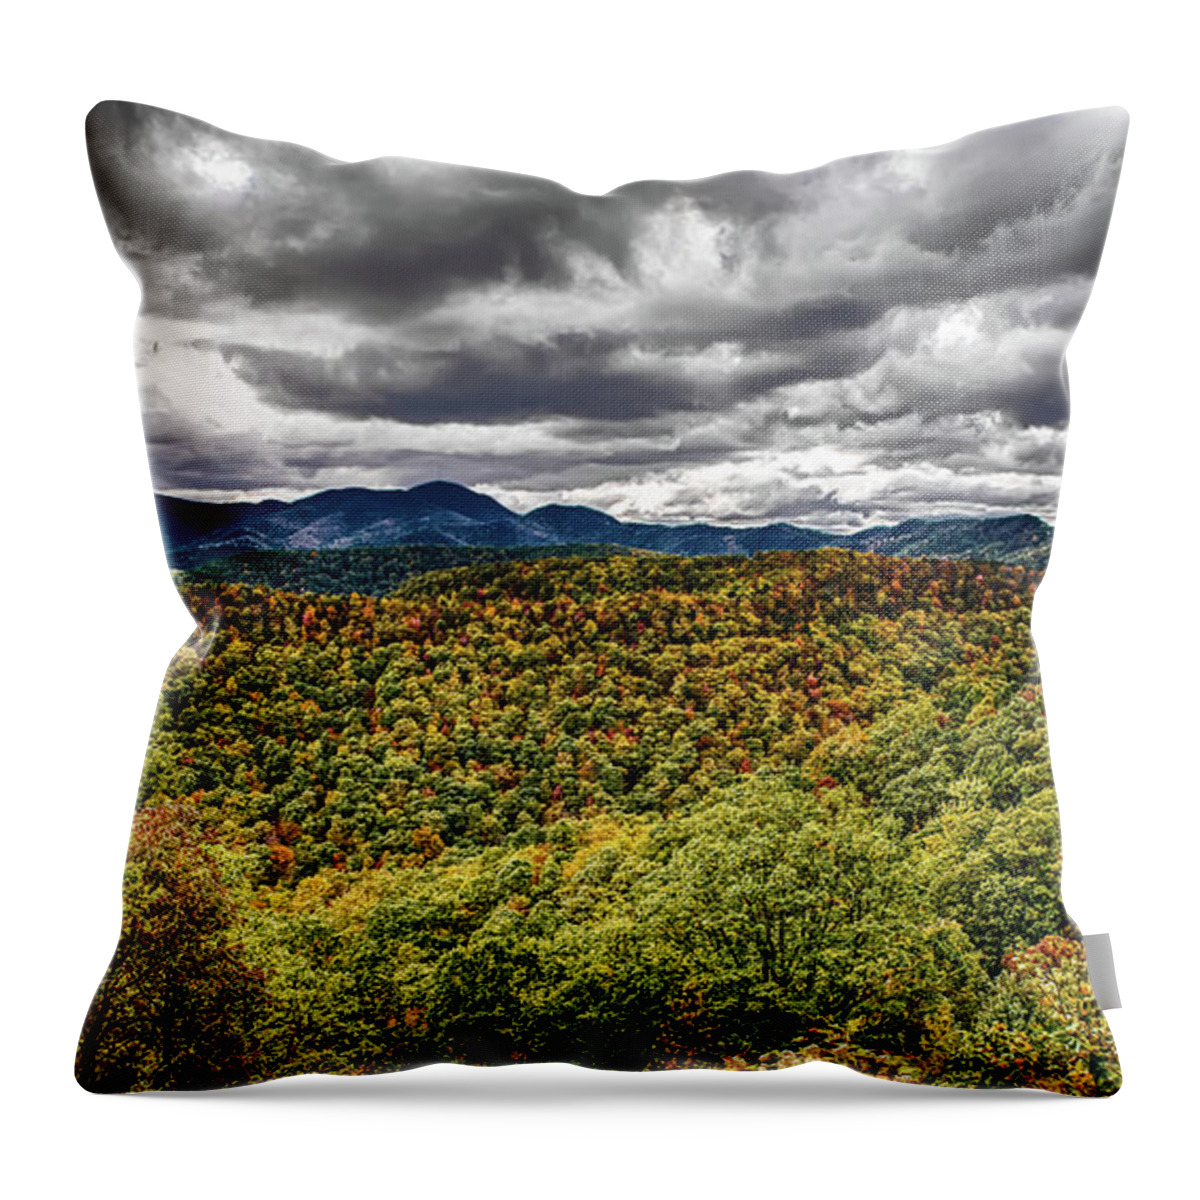 Blue Throw Pillow featuring the photograph Blue Ridge And Smoky Mountains Changing Color In Fall by Alex Grichenko